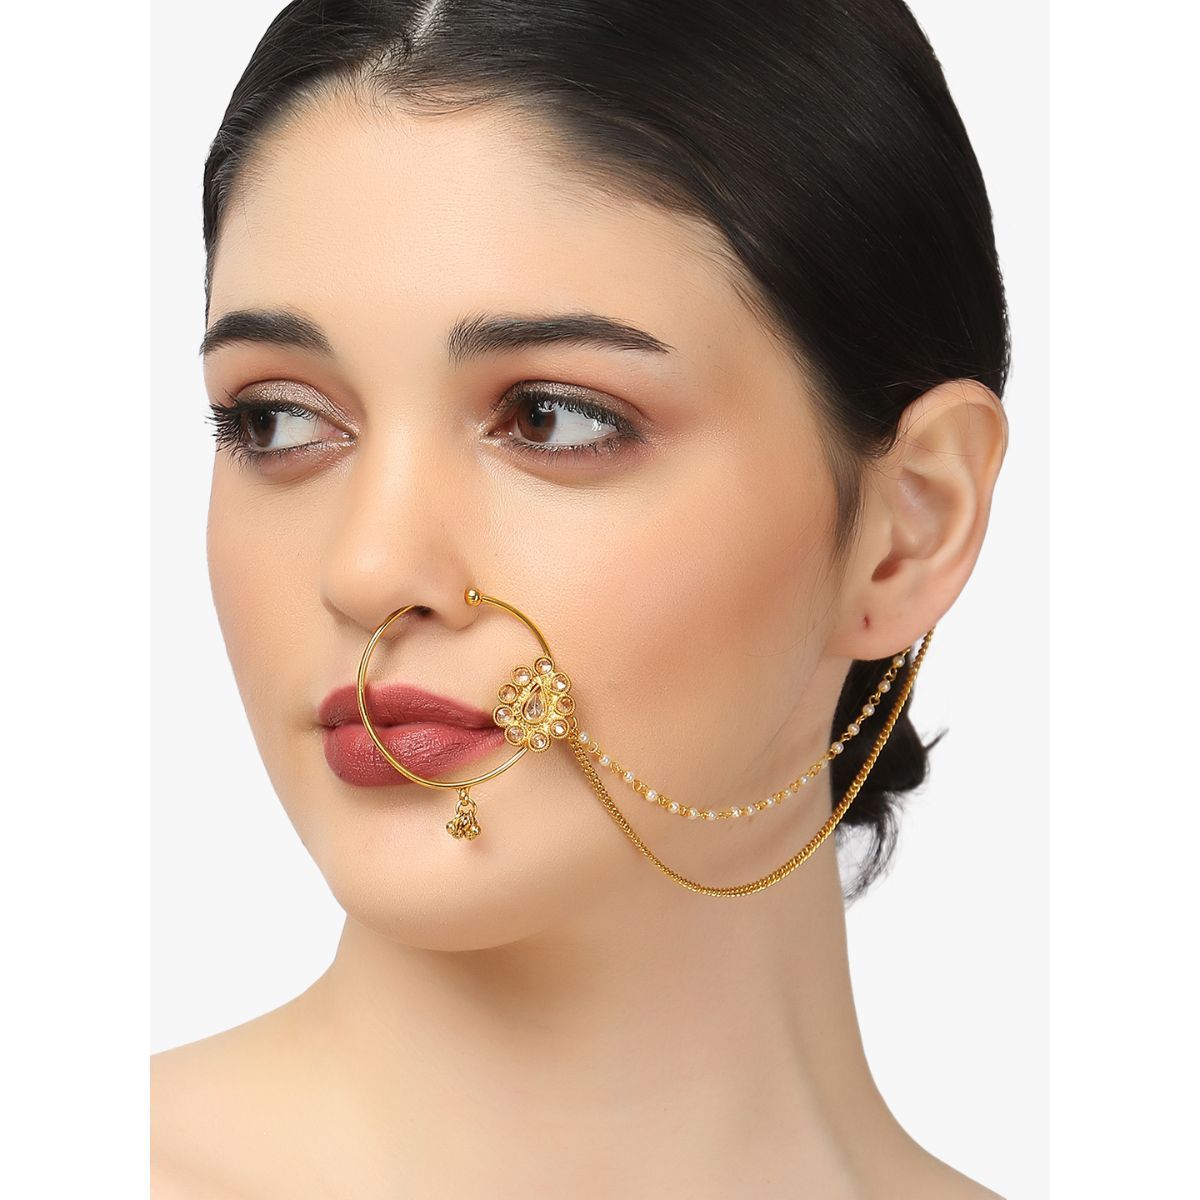 14K Gold Nose Ring with Diamond 20G Double Hoop – OUFER BODY JEWELRY